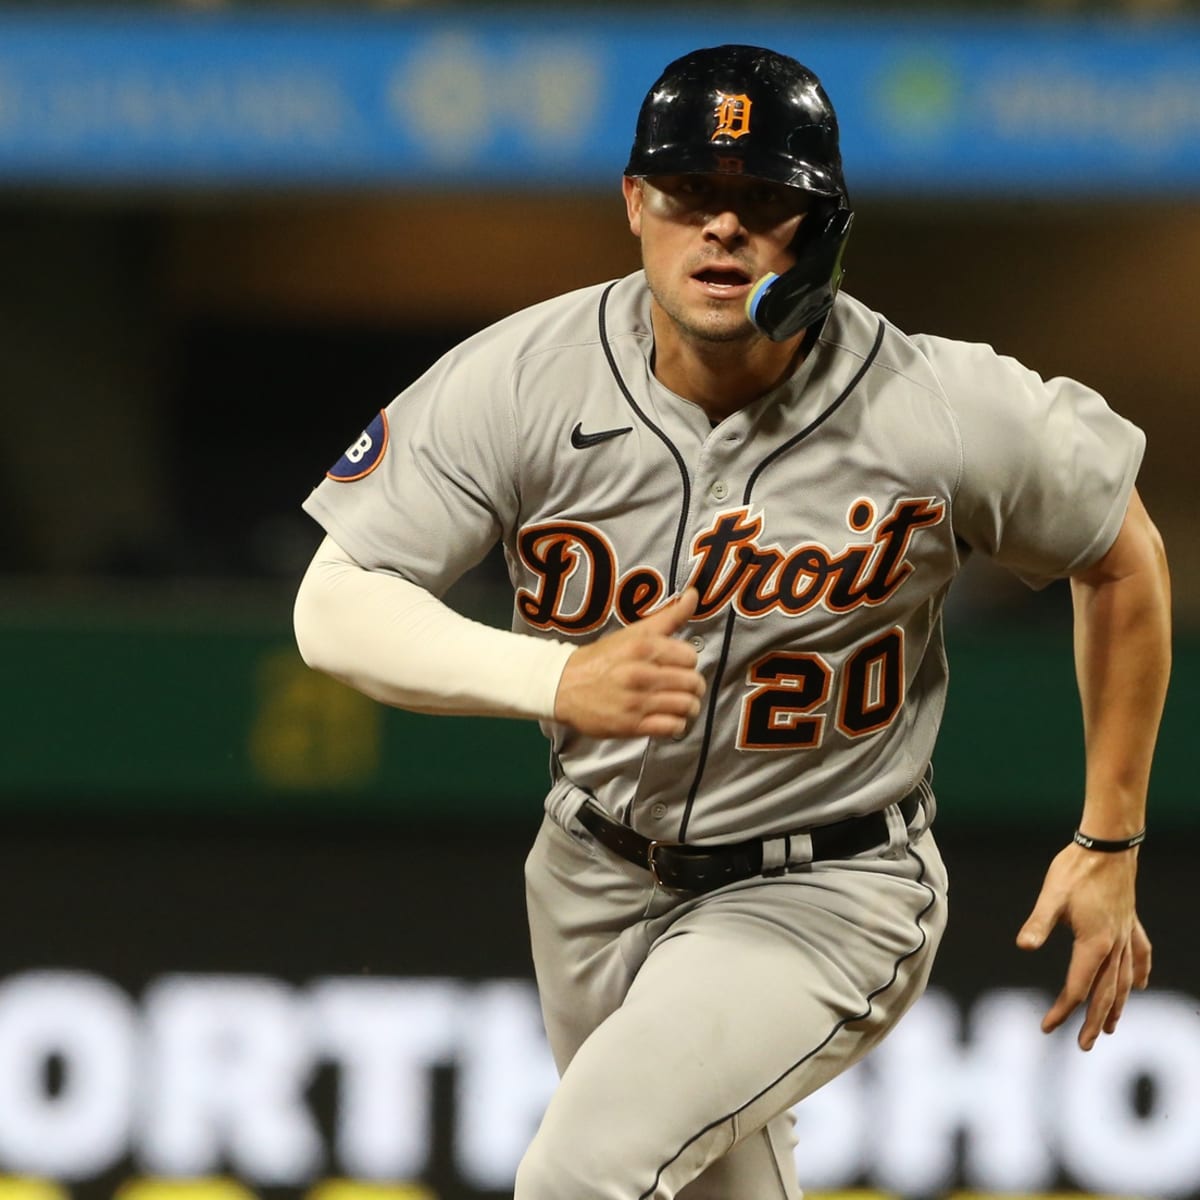 Spencer Torkelson, Former No. 1 Pick, Optioned to Minors by Tigers